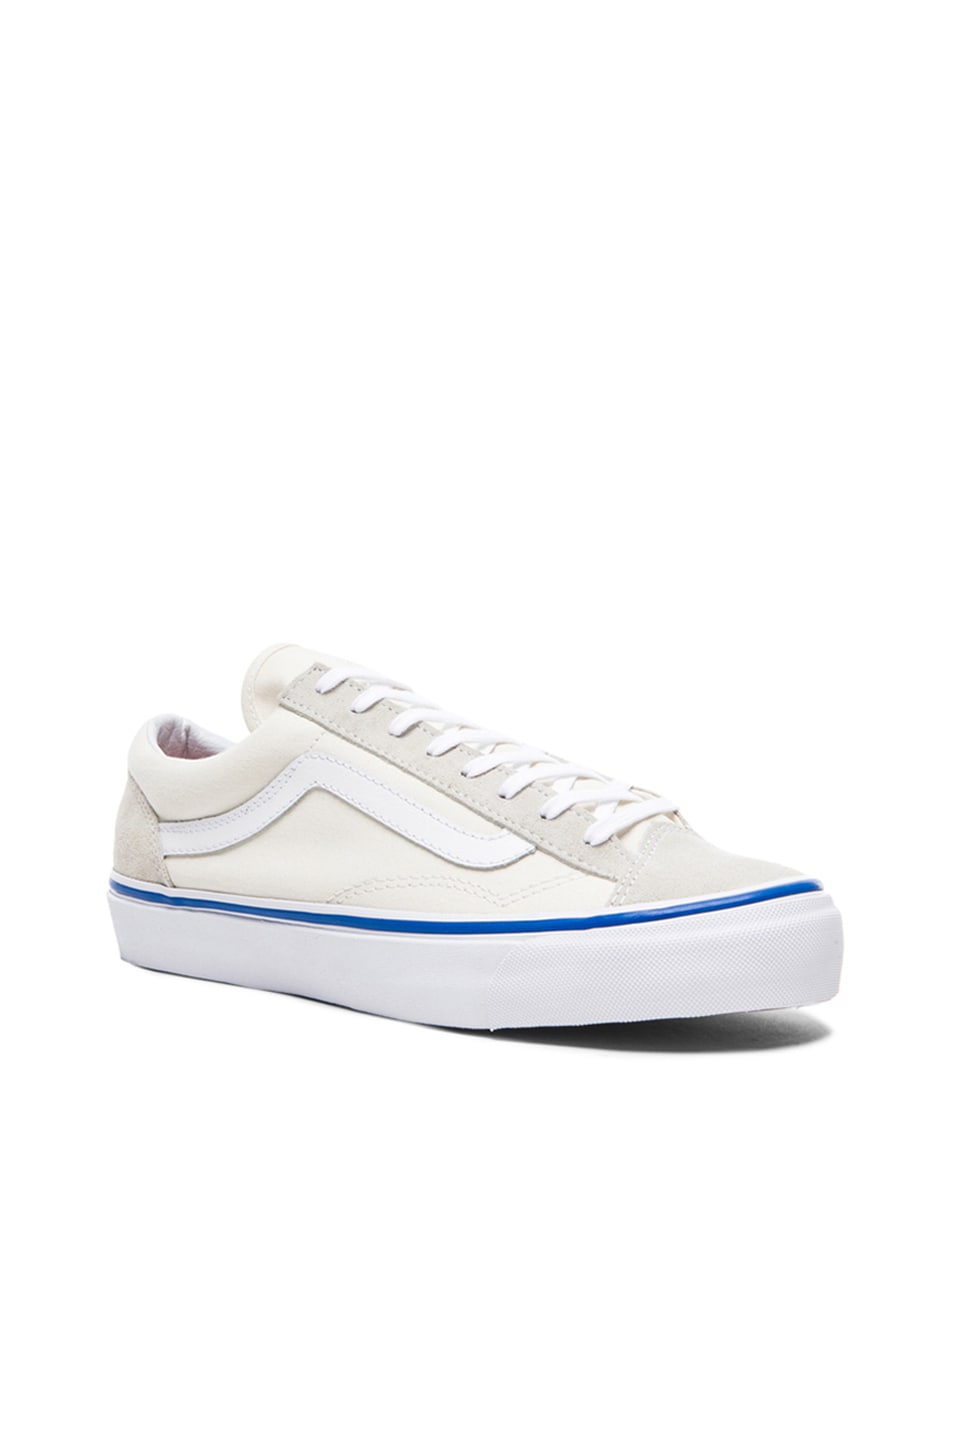 Image 1 of Gosha Rubchinskiy x Vans Lace Up Suede Shoes in Off White